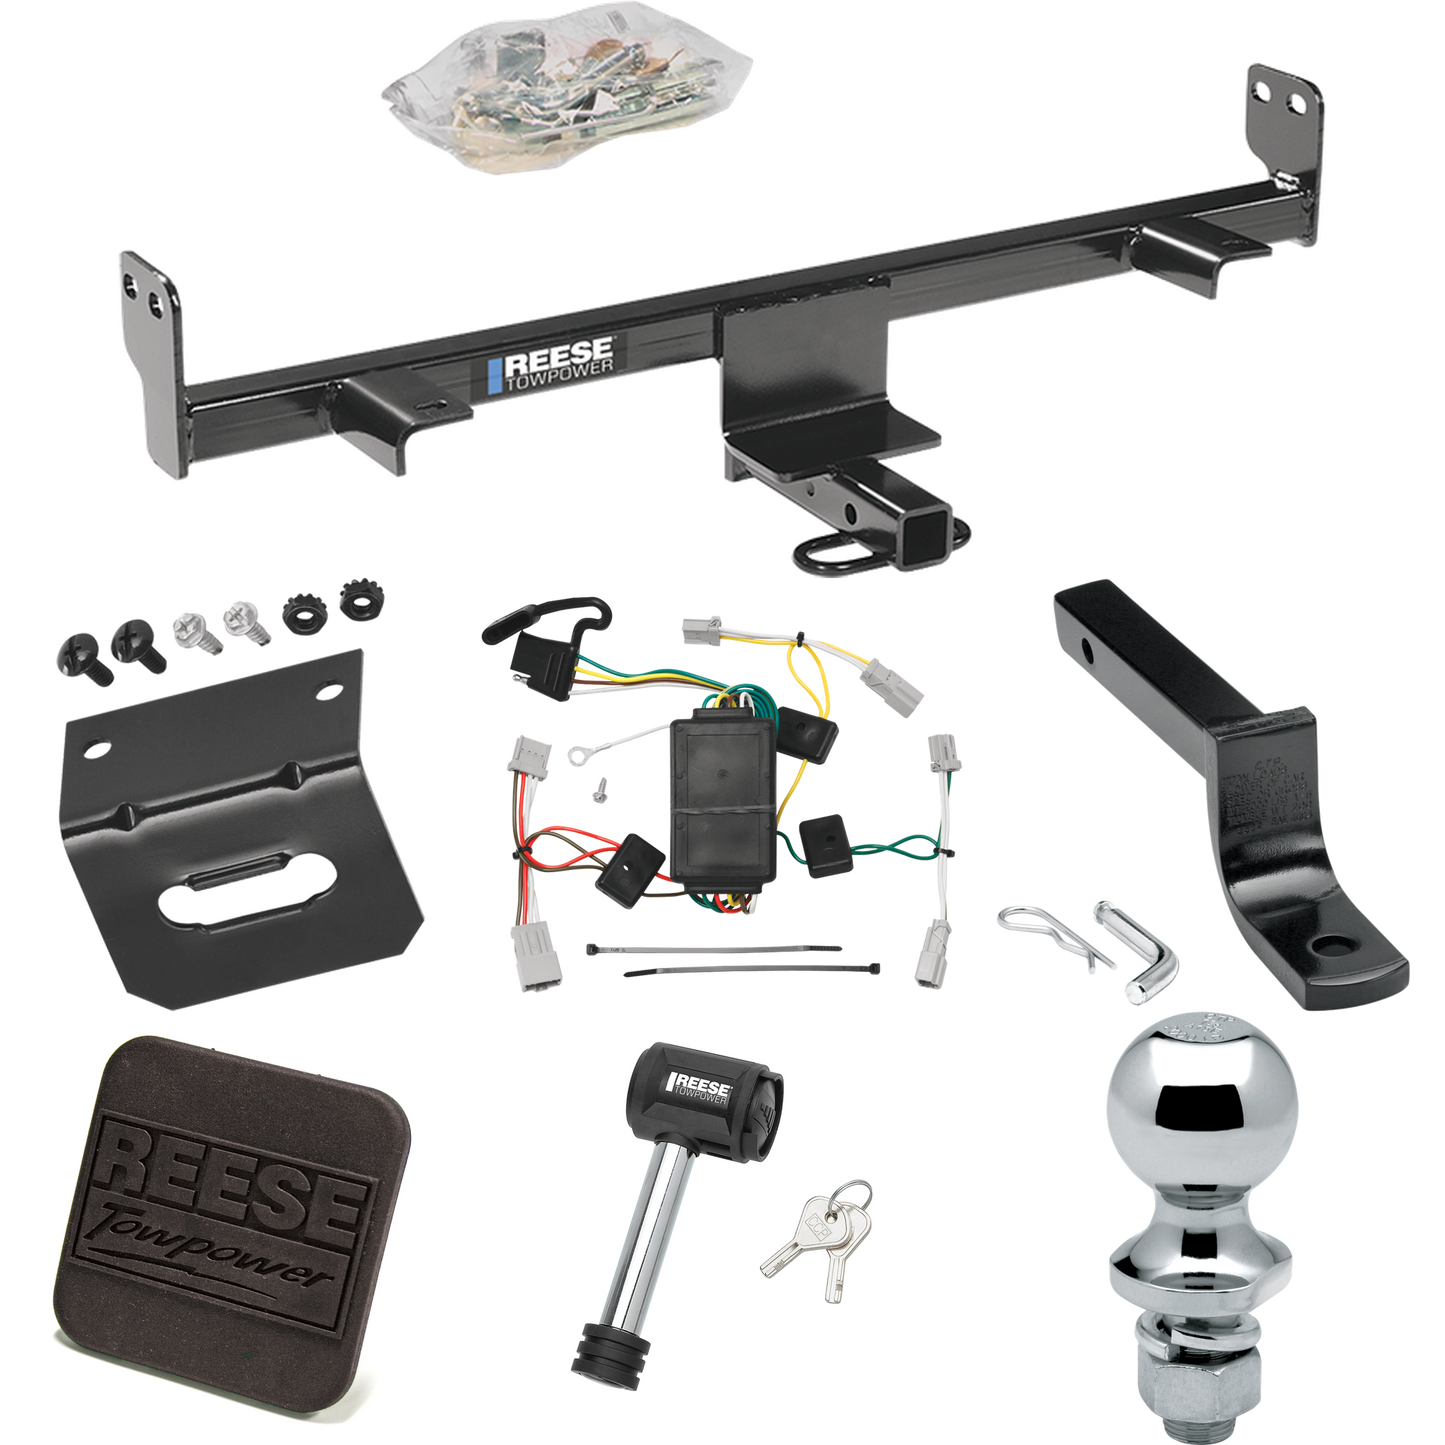 Fits 2004-2009 Mazda 3 Trailer Hitch Tow PKG w/ 4-Flat Wiring Harness + Draw-Bar + 1-7/8" Ball + Wiring Bracket + Hitch Cover + Hitch Lock (For Hatchback, Except w/Grand Touring LED Taillights Models) By Reese Towpower